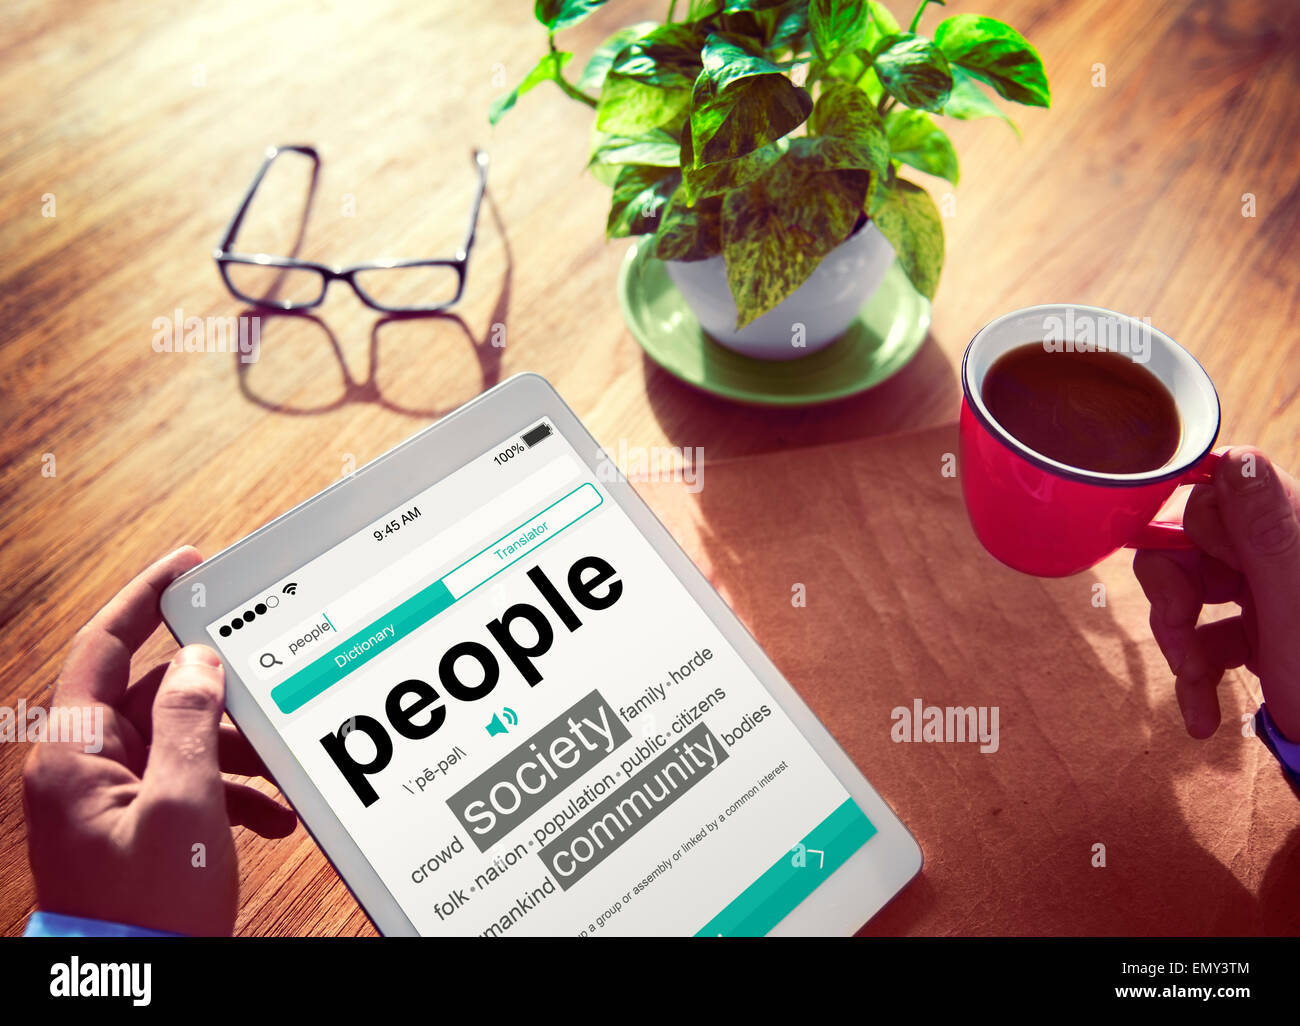 Digital Online Dictionary People Society Office Working Concept Stock Photo